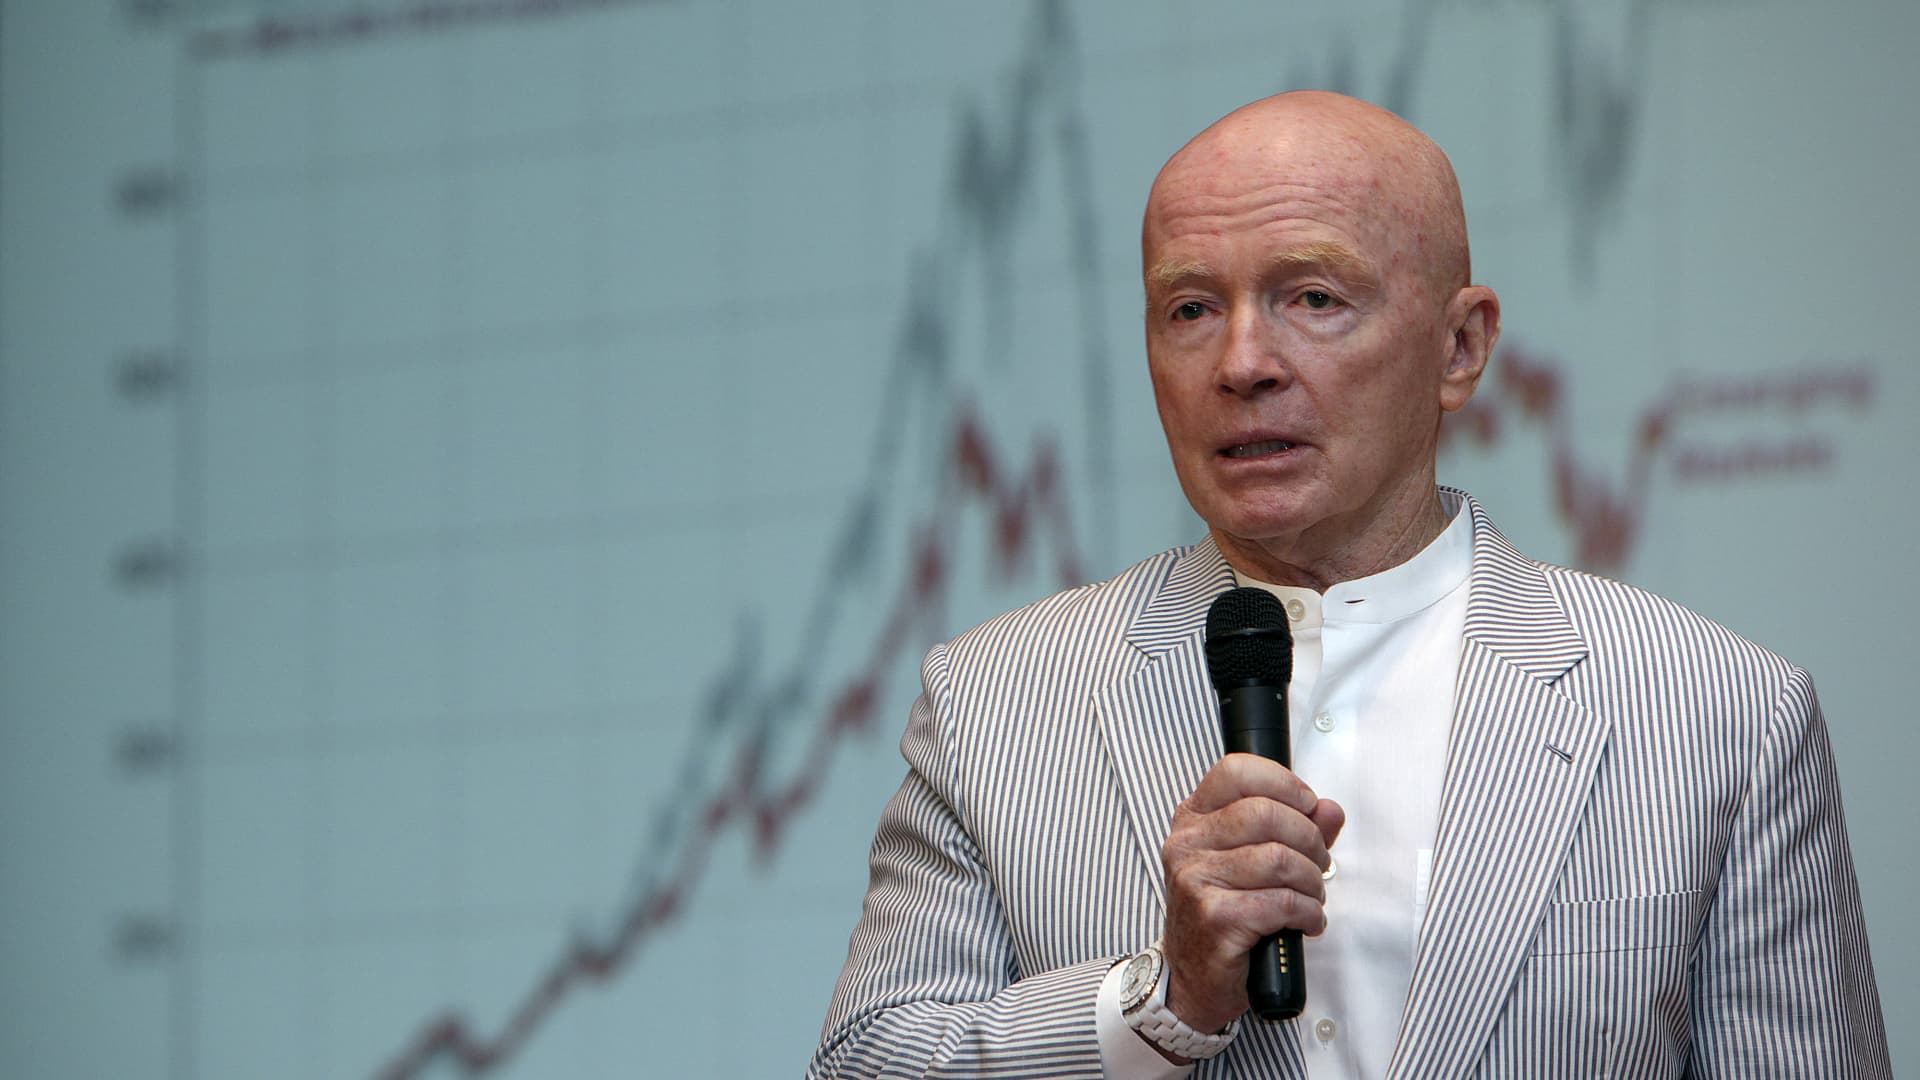 China denies Mark Mobius' claims that its government is restricting capital flow